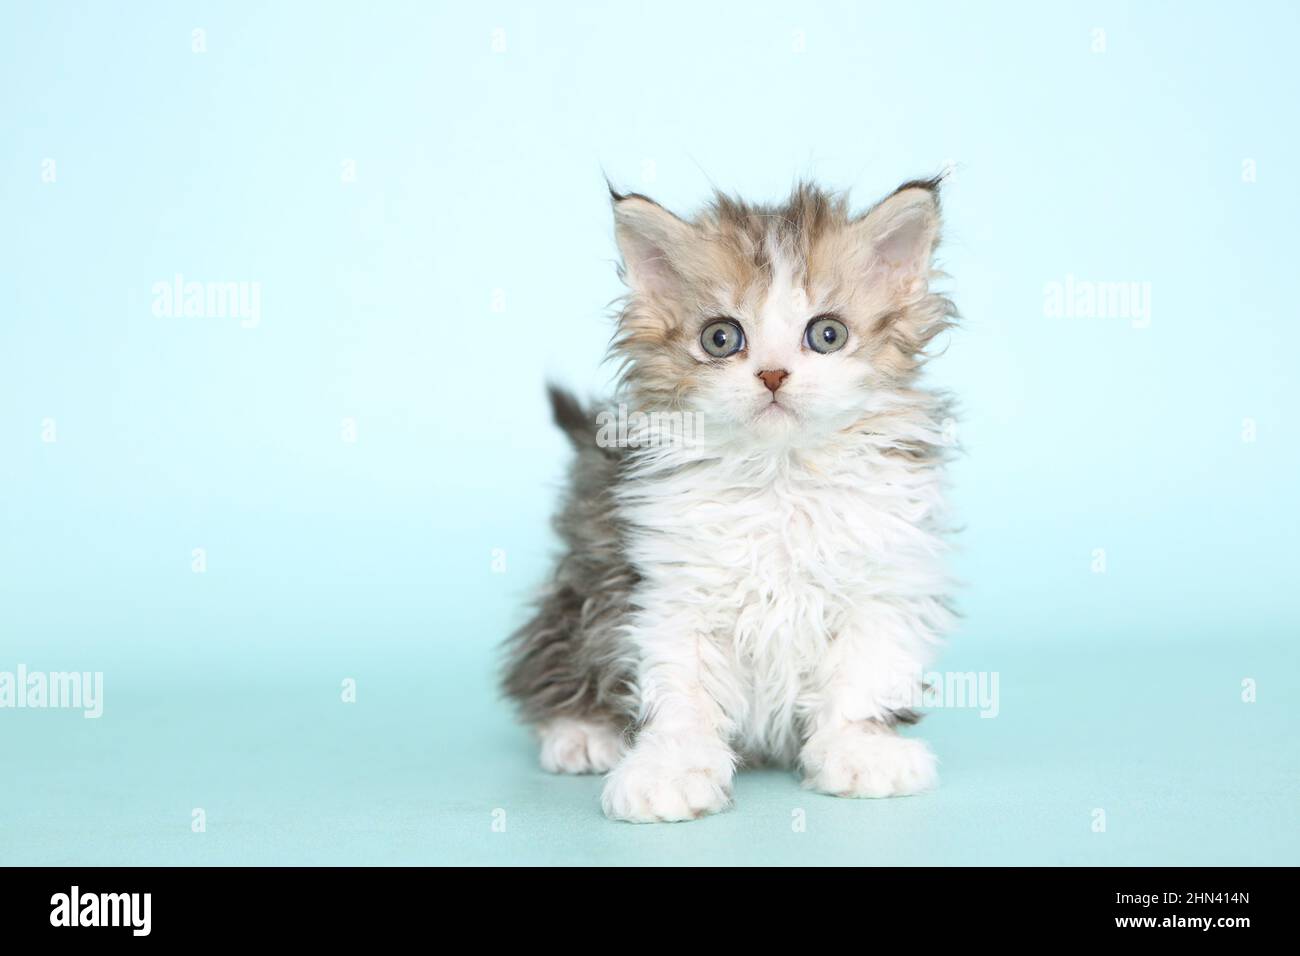 Selkirk Rex. Kitten sitting. Studio picture against a light-blue background. Germany Stock Photo